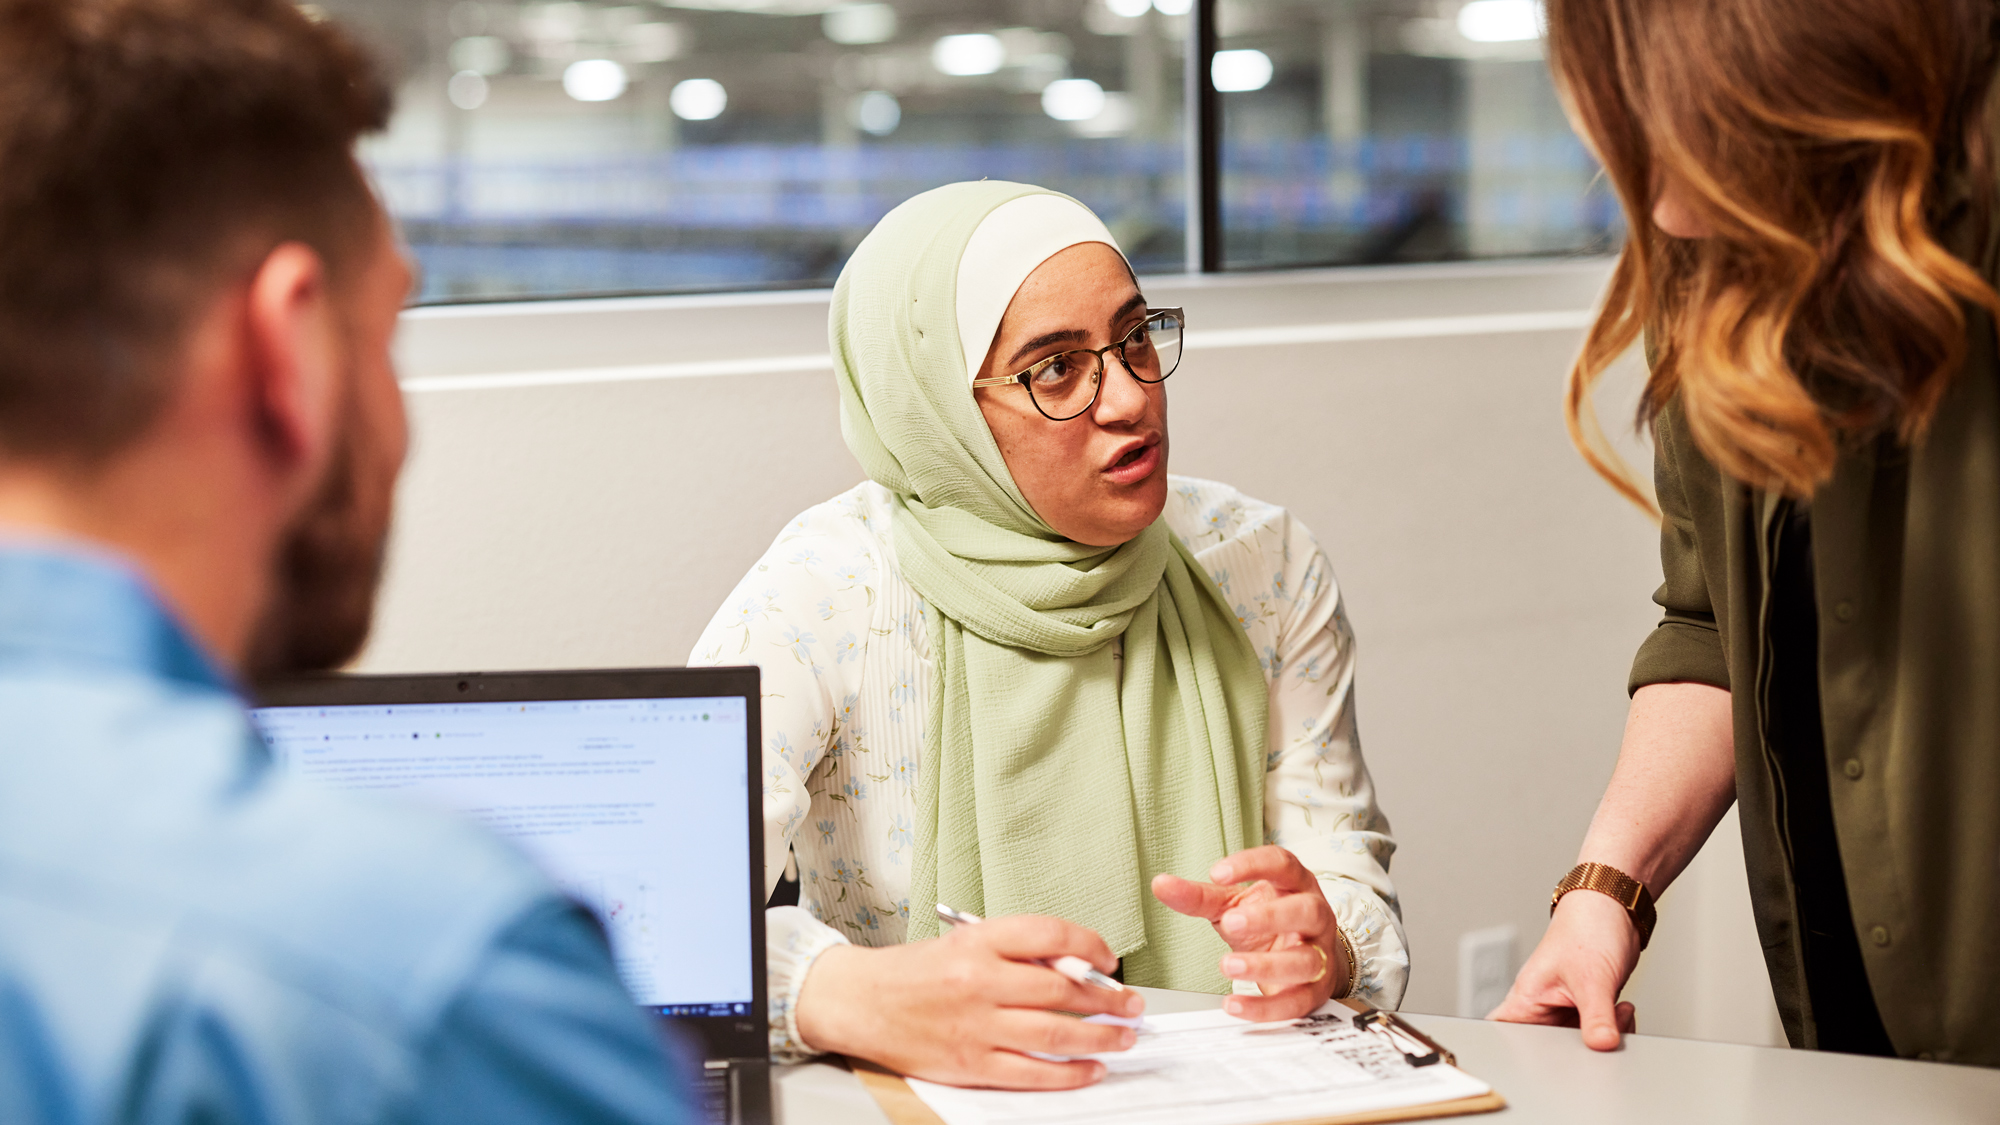 A woman wearing glasses and a hijab is sitting and explaining something to a sitting man and a standing woman at an office in front of a clipboard